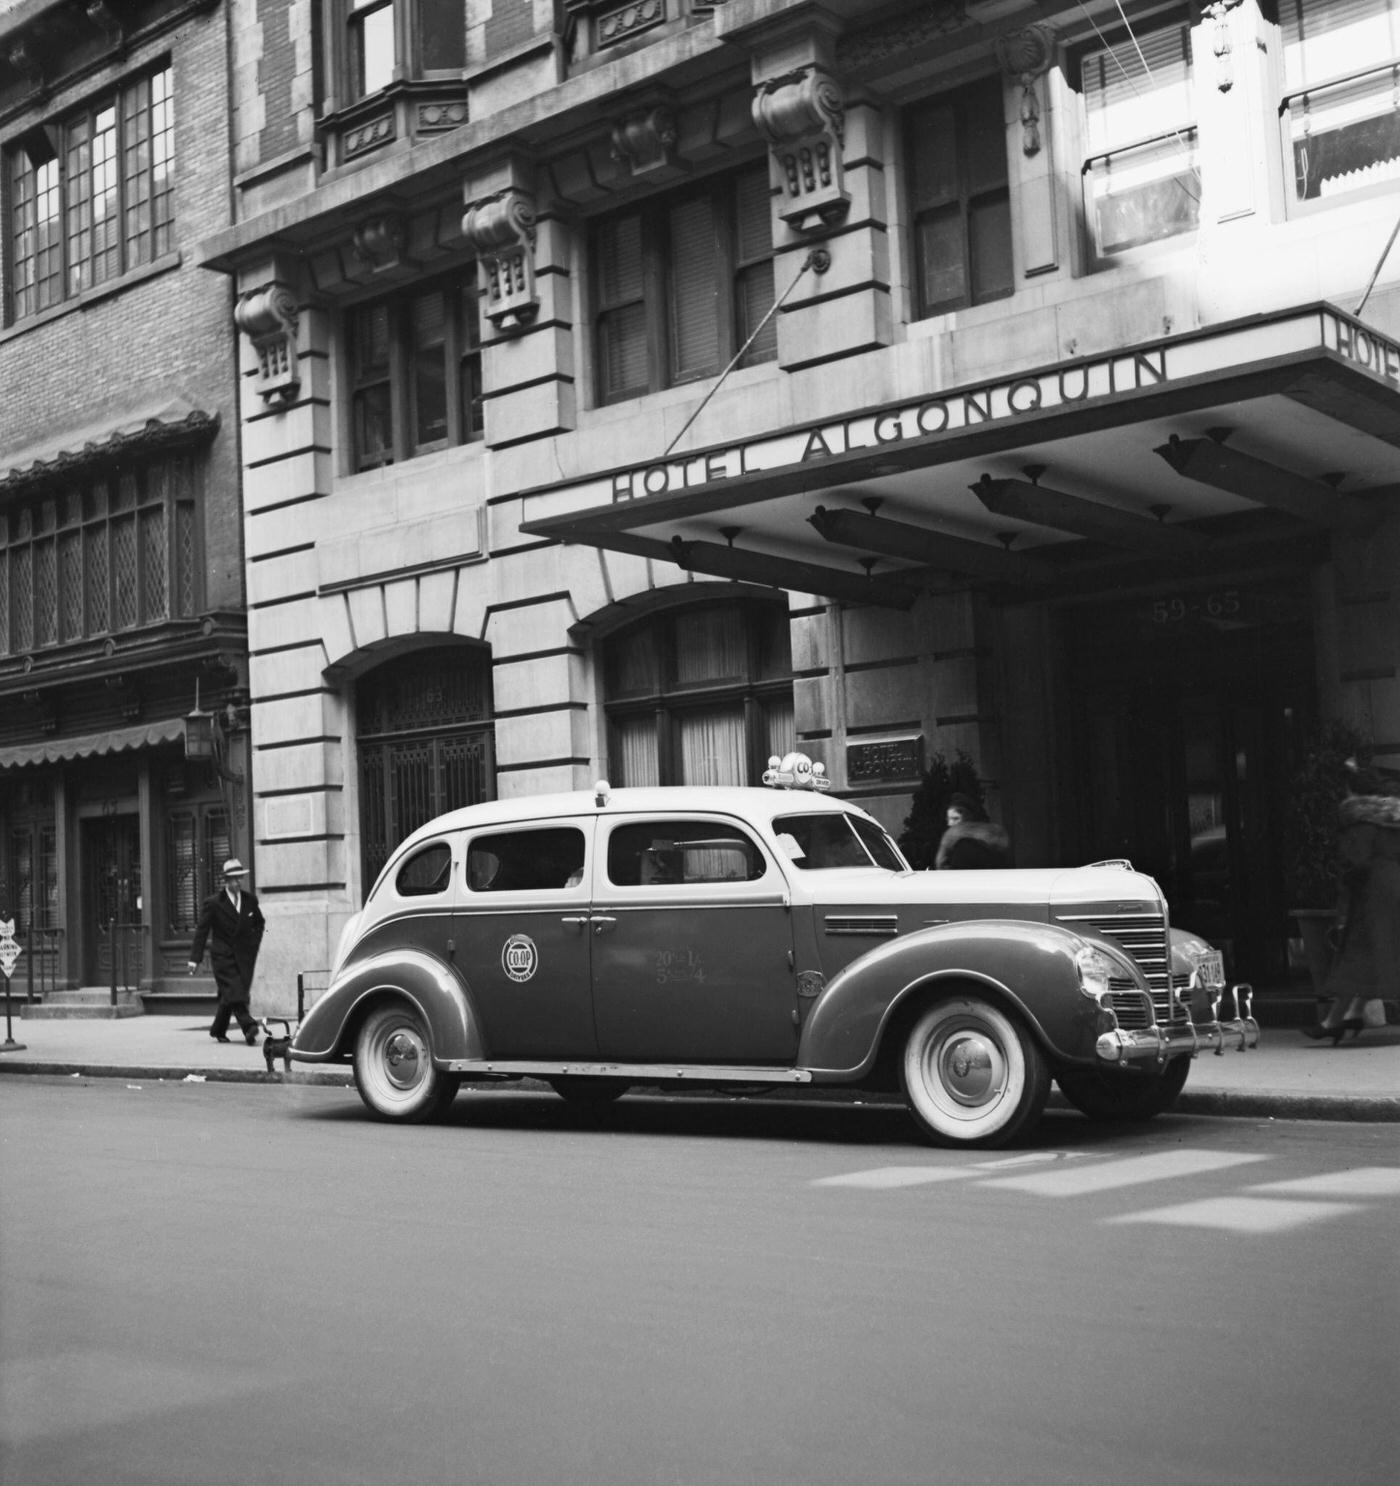 Co-Op Drivers Cab Parked Outside The Hotel Algonquin On West 44Th Street In Midtown Manhattan, 1940.